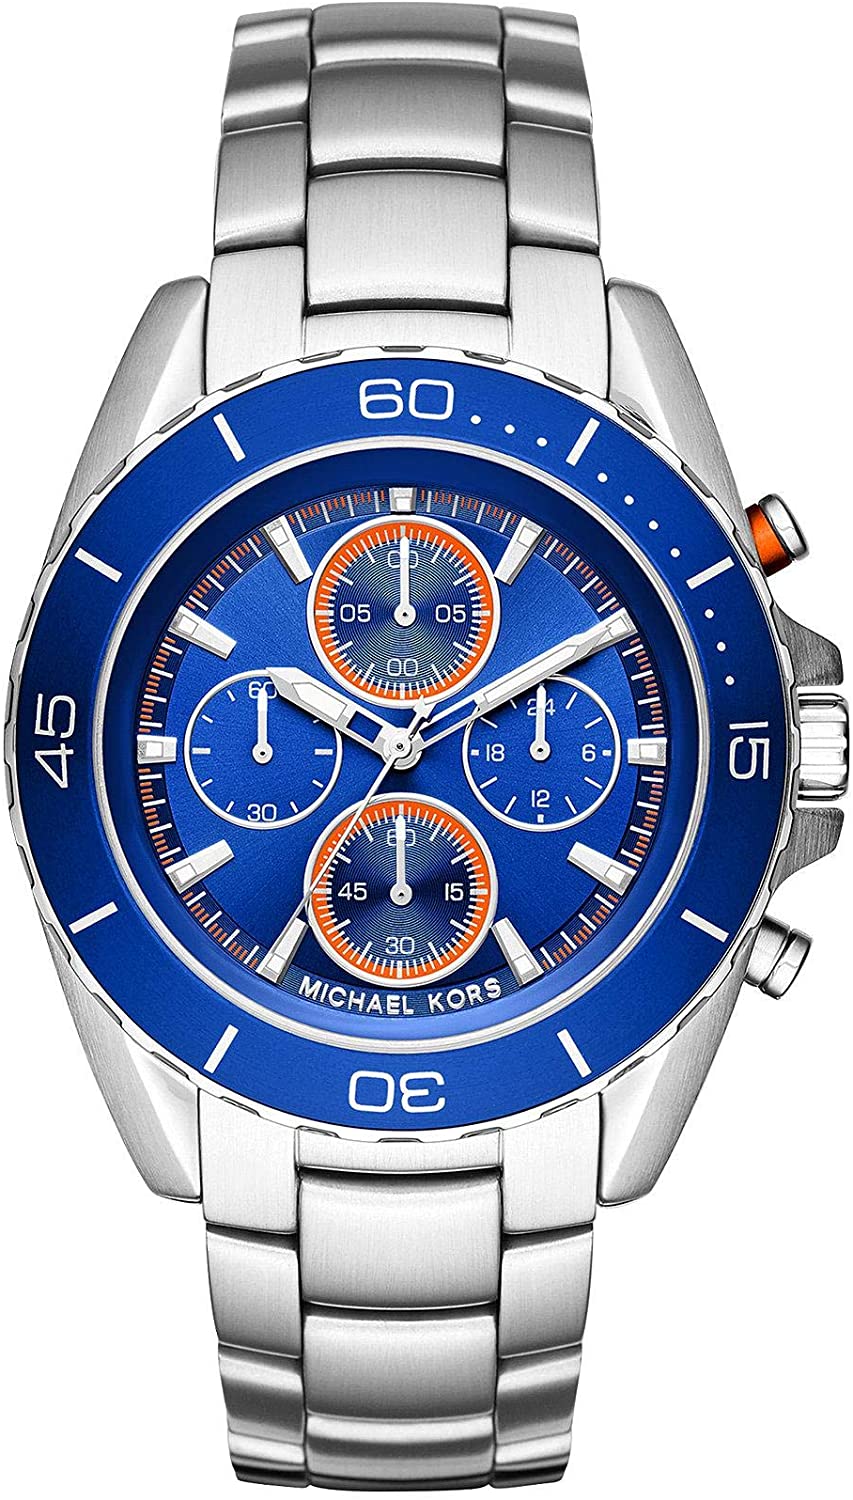 Jetmaster Chronograph Watch (Silver/Blue) | Michael Kors | Luby 